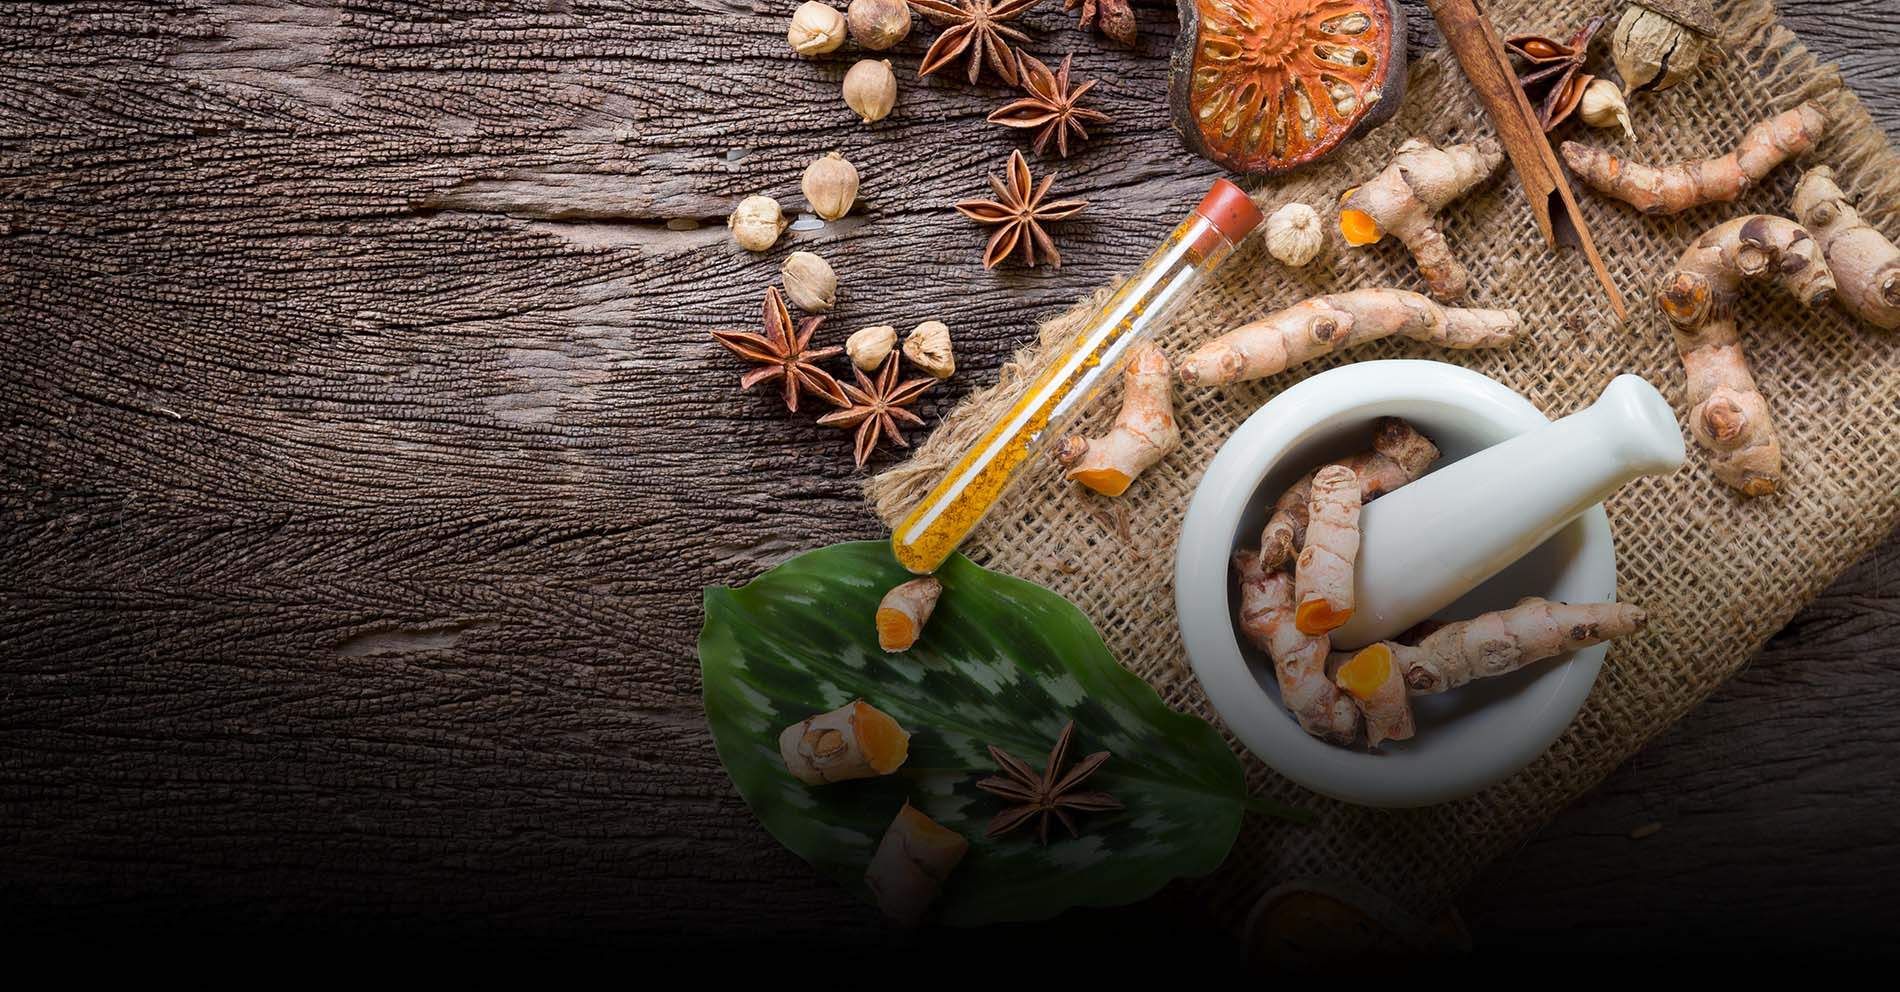 Why is ayurvedic science most reliable? Why is it better than medical science?